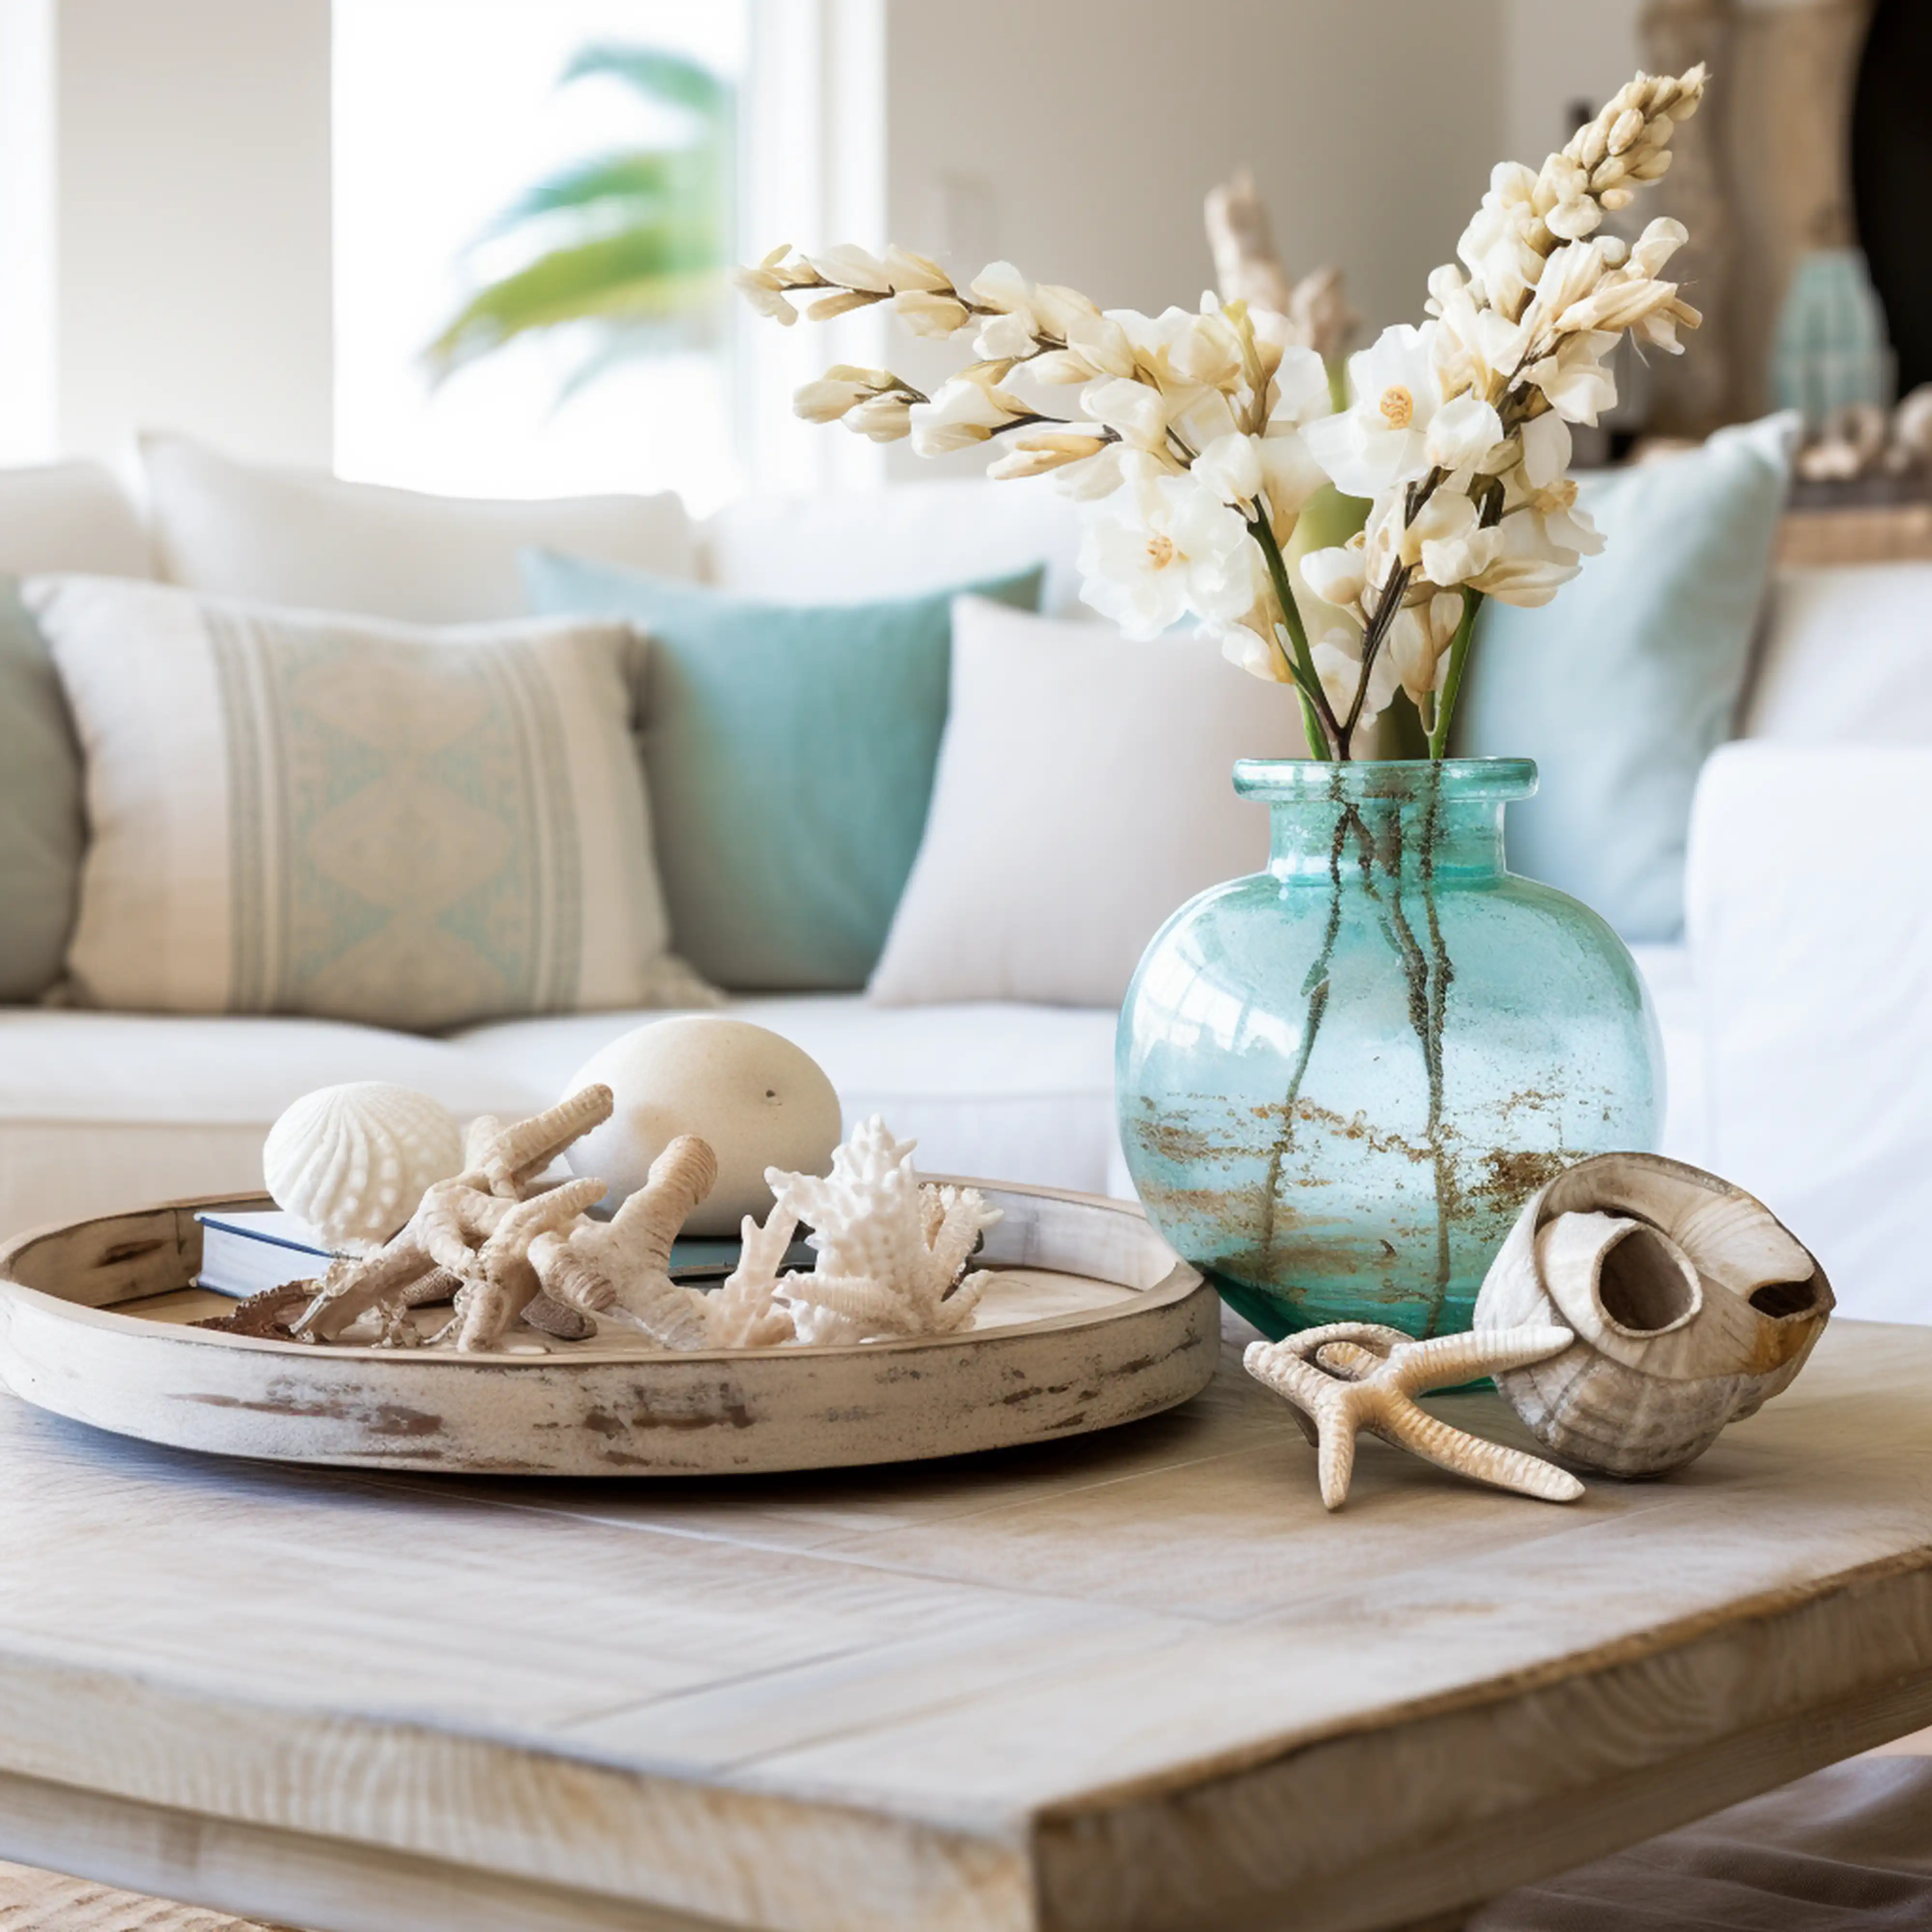 Coastal style living room with a turquoise vase, white flowers, and seashells on a wooden tray, interior by Sarah Brown Design